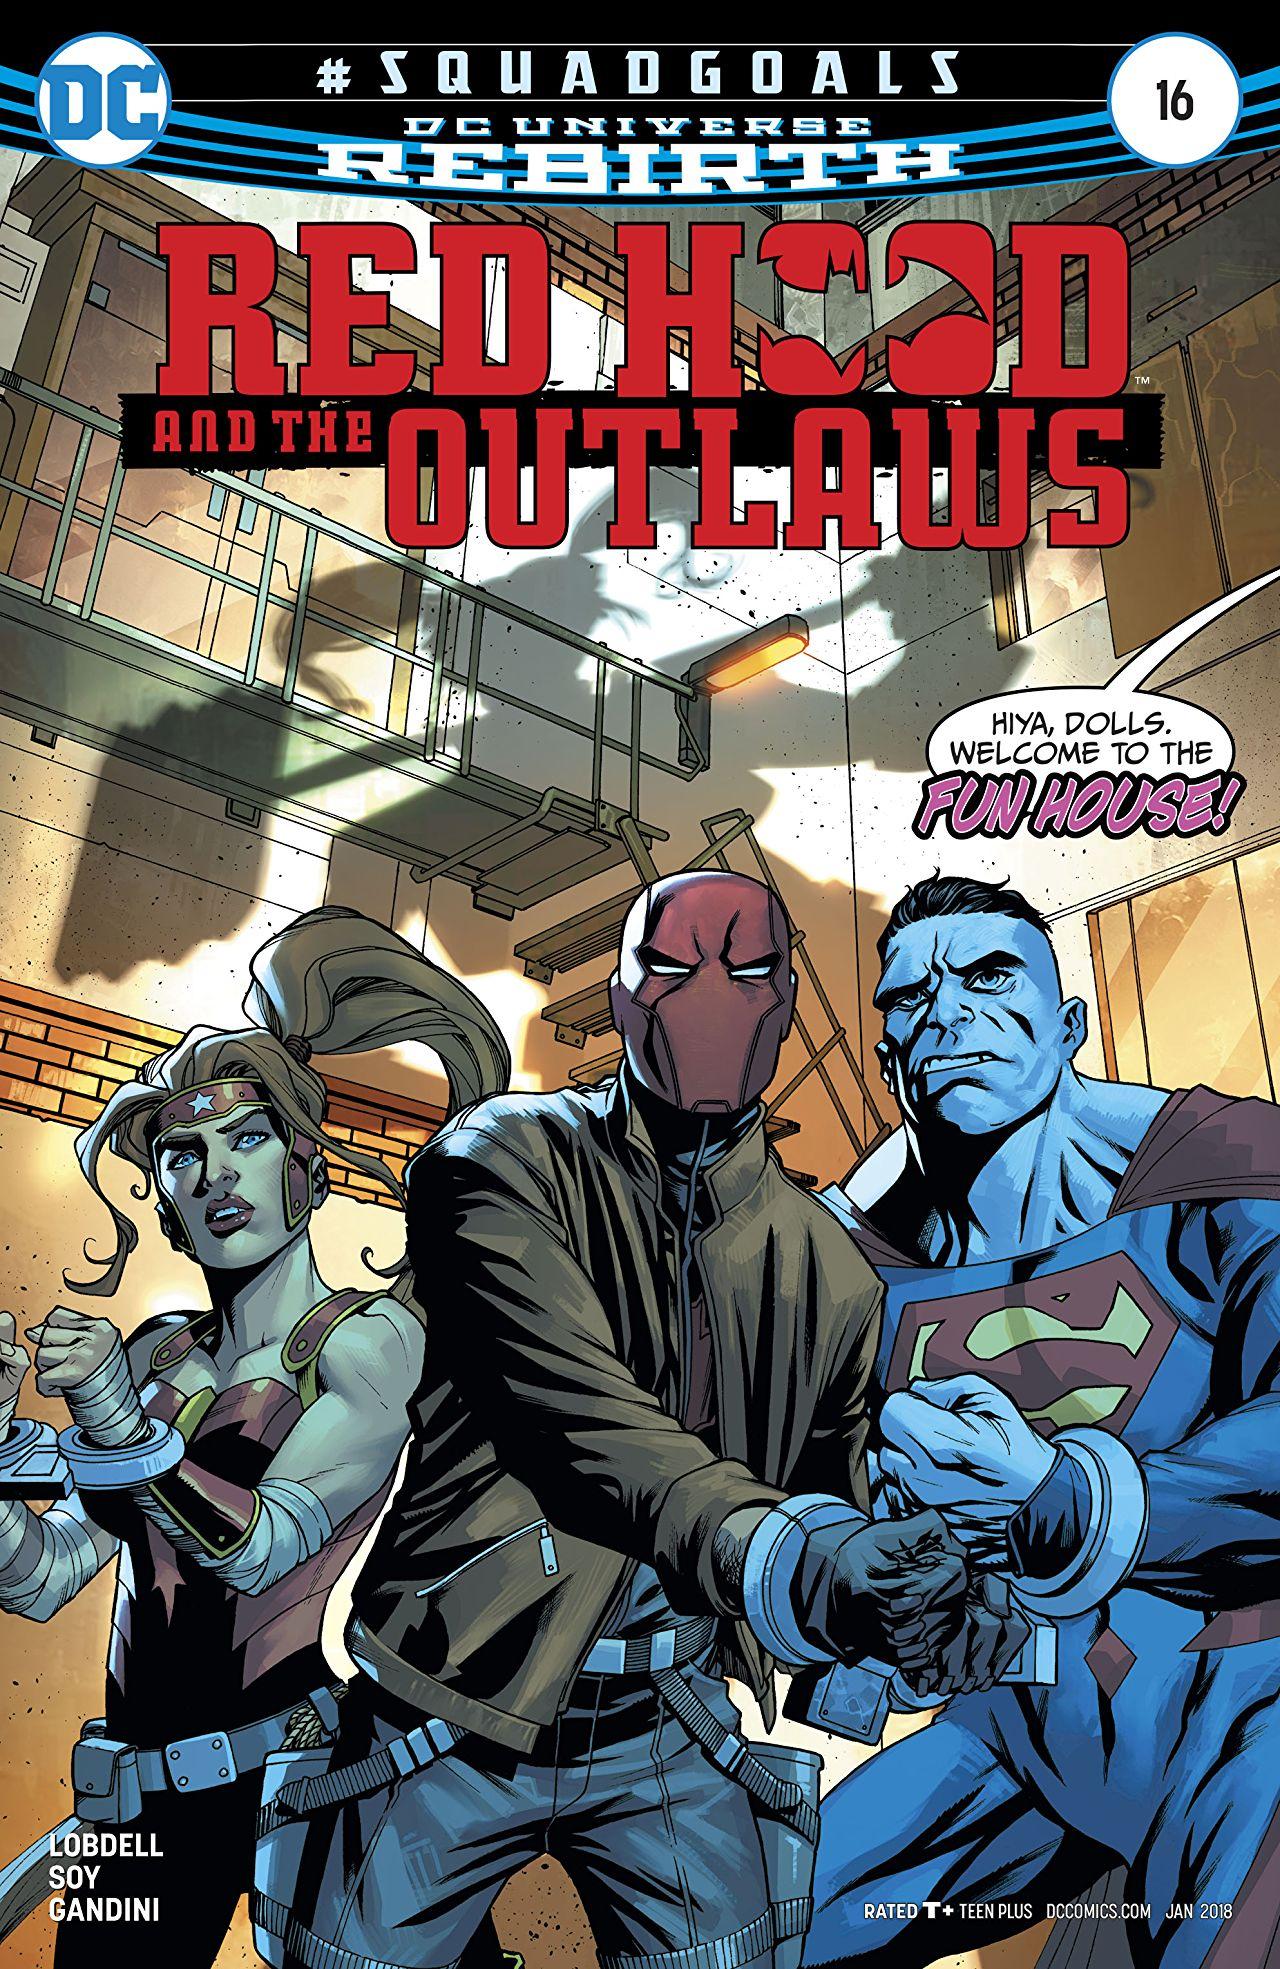 Red Hood and the Outlaws Vol. 2 #16